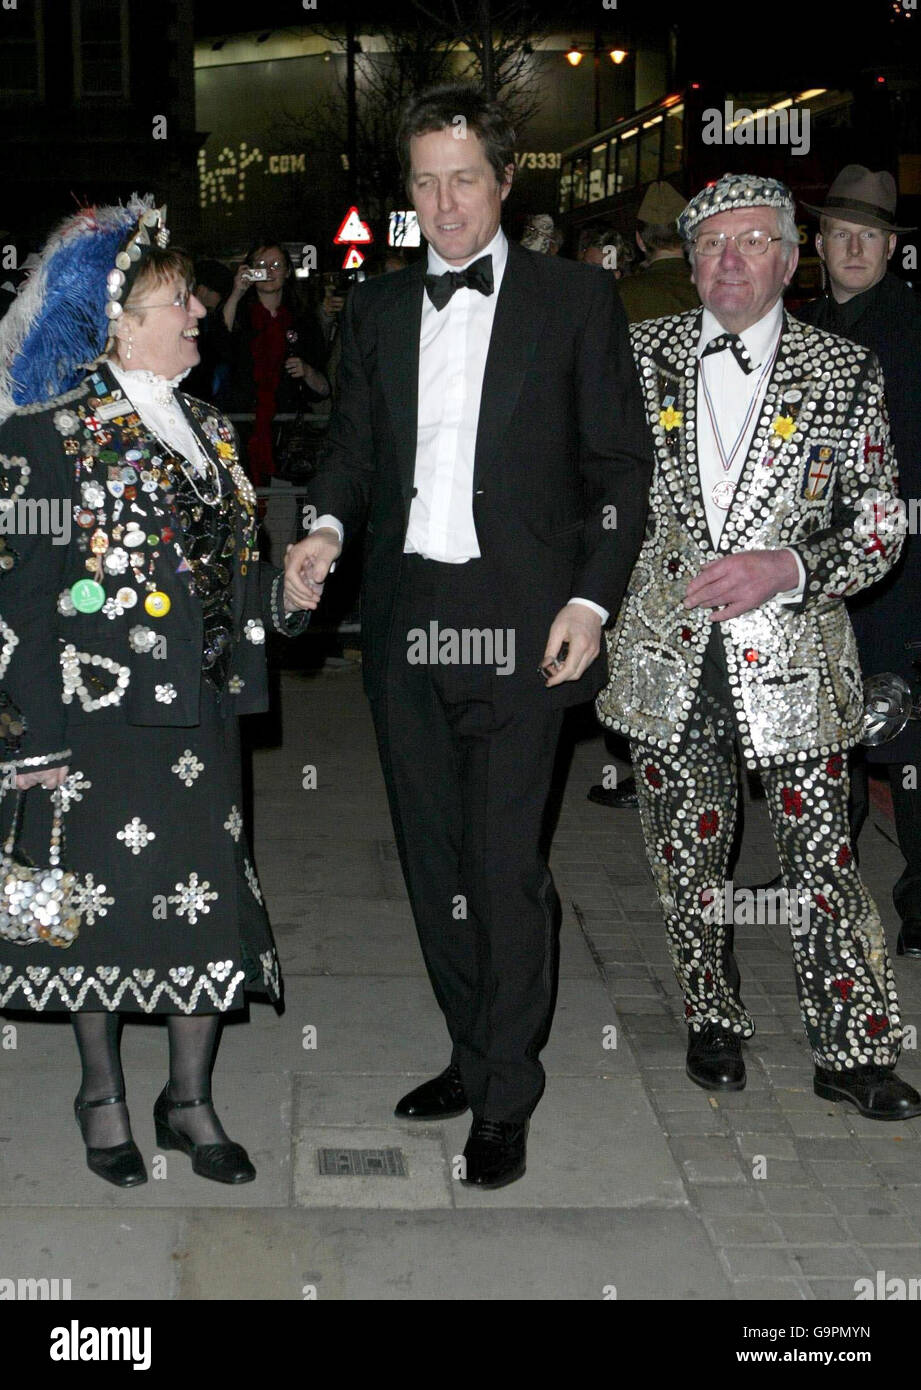 Hugh Grant arrives for a fancy dress party to celebrate Sir Elton John's 60th birthday, at Shoreditch Town Hall in east London. Stock Photo